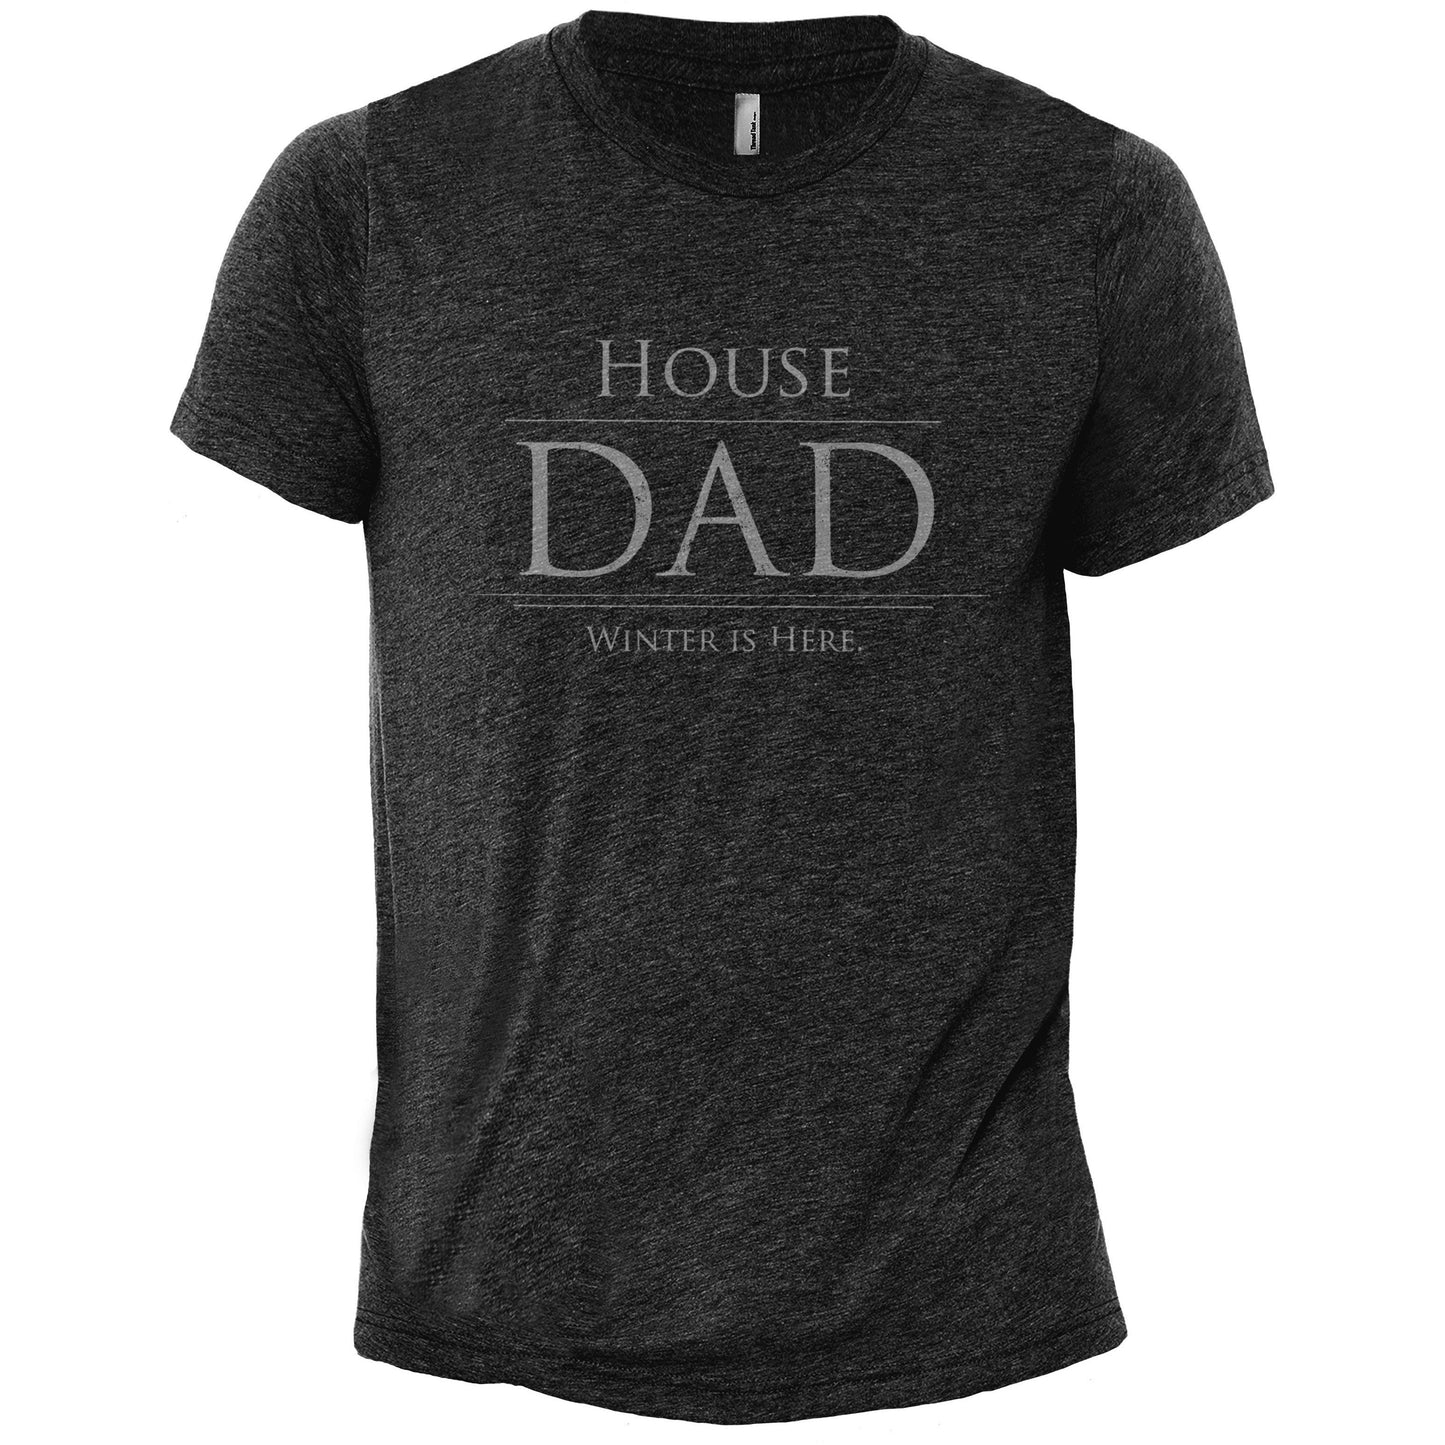 House Dad Winter Is Here Charcoal Printed Graphic Men's Crew T-Shirt Tee